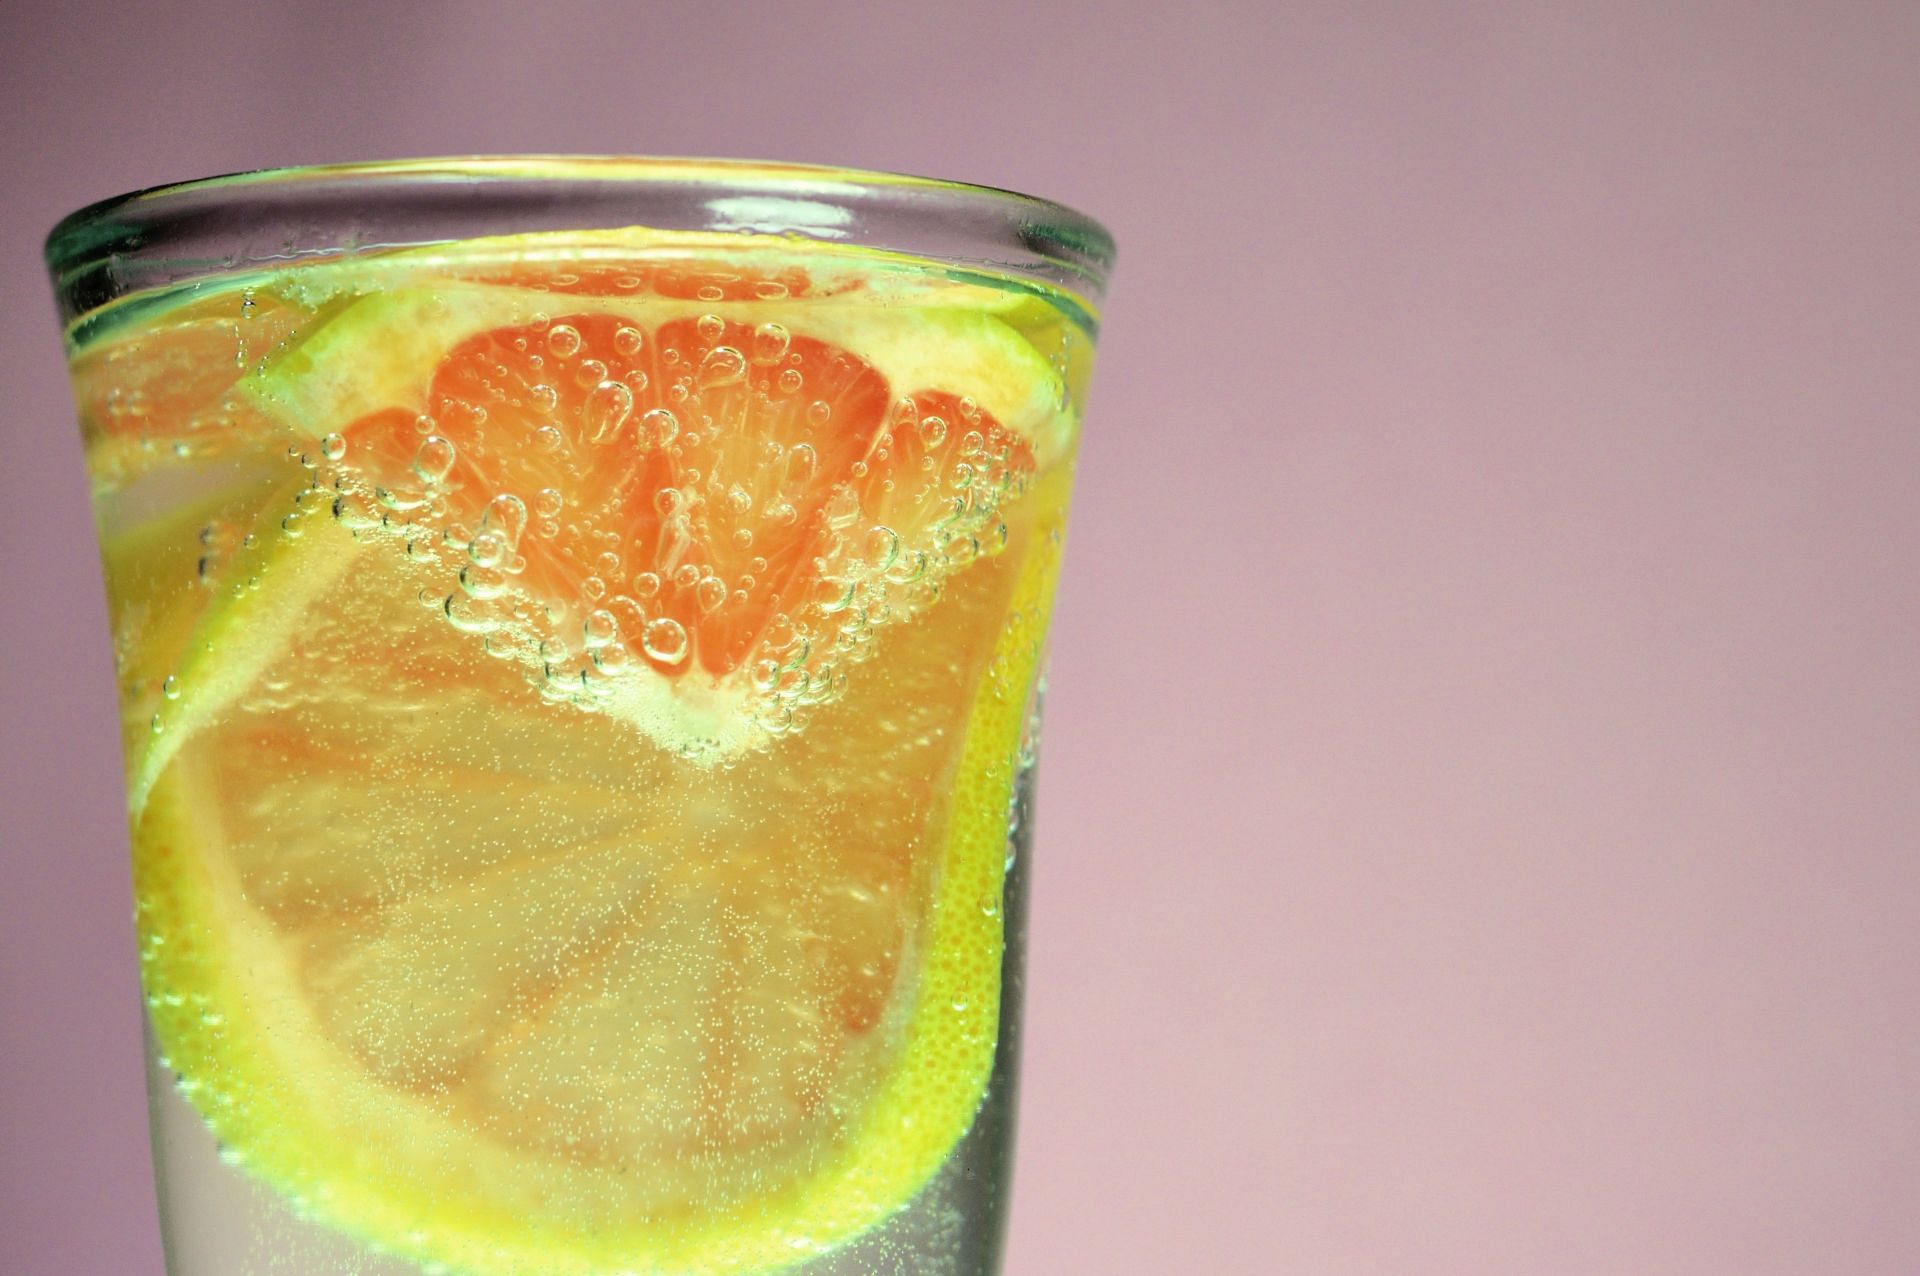 Is citric acid bad for you? Read on to find out! (Image via pexels/Miguel A Padrinan)